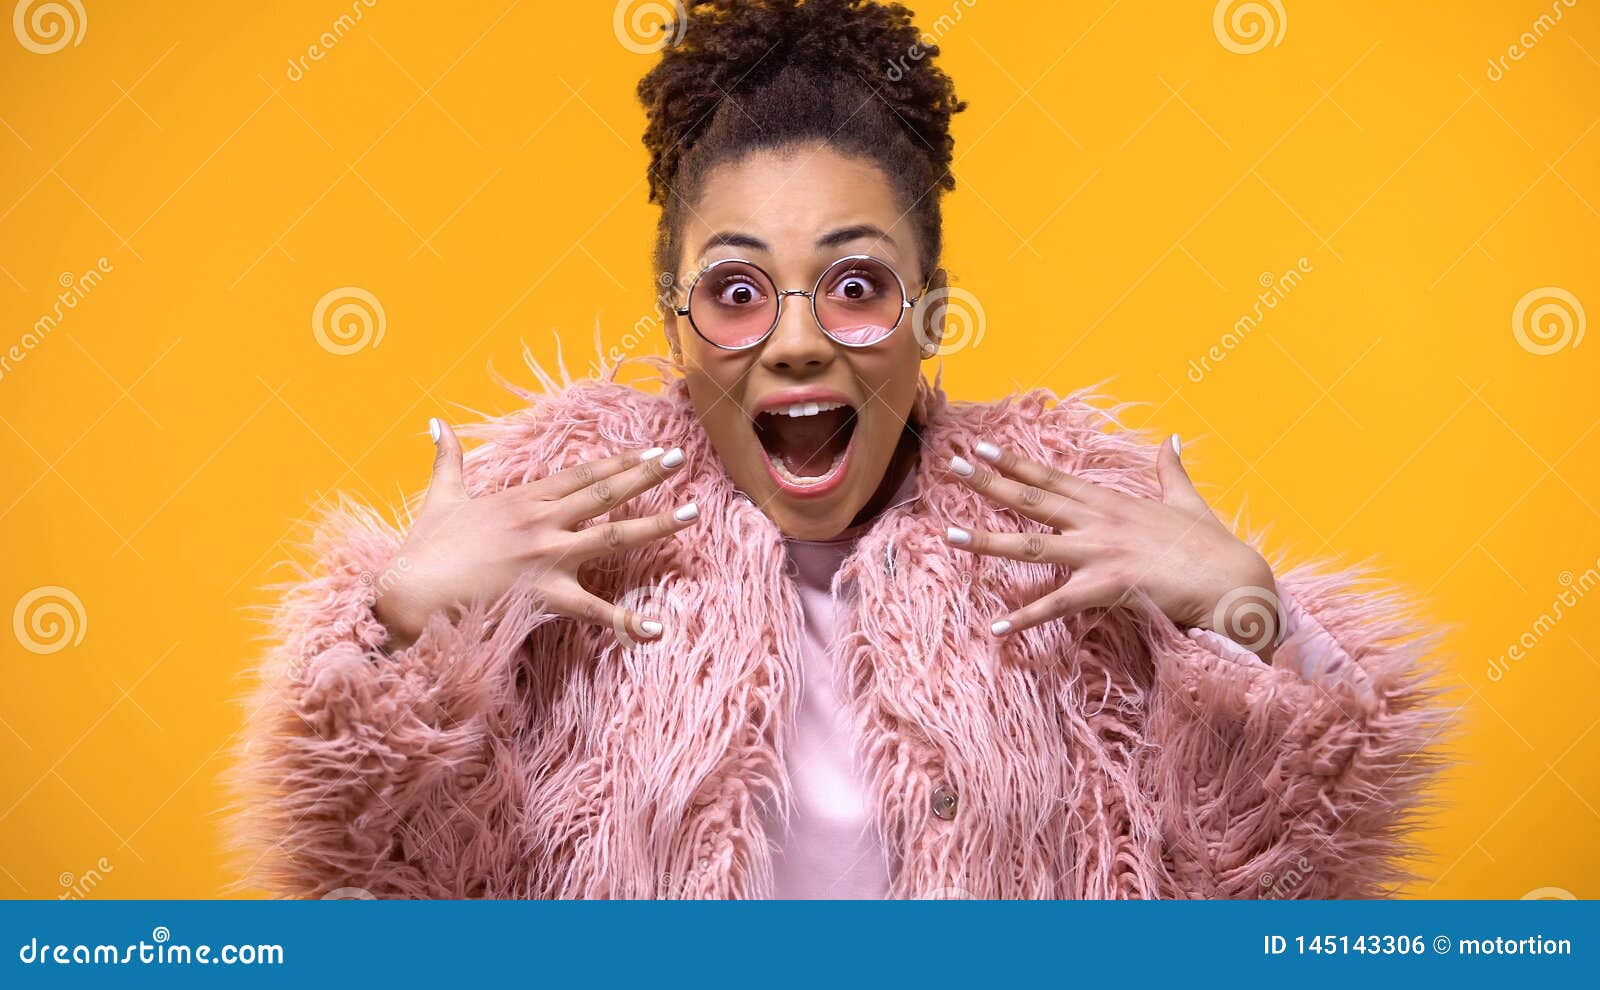 excited young woman on bright background, fashion trends, millennial glamour